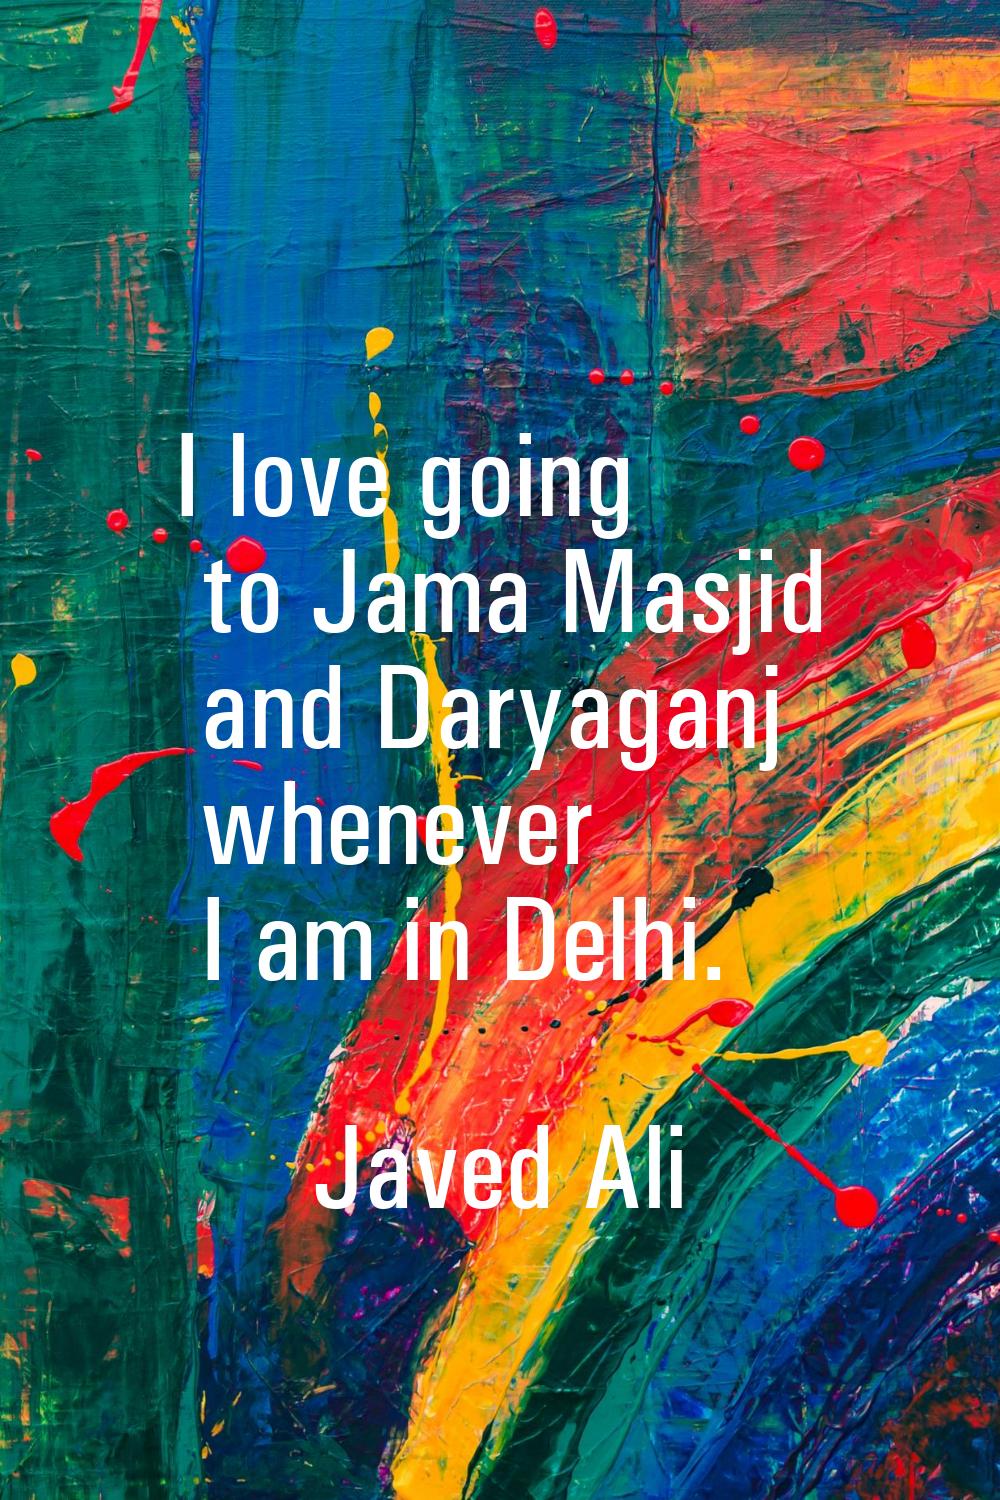 I love going to Jama Masjid and Daryaganj whenever I am in Delhi.